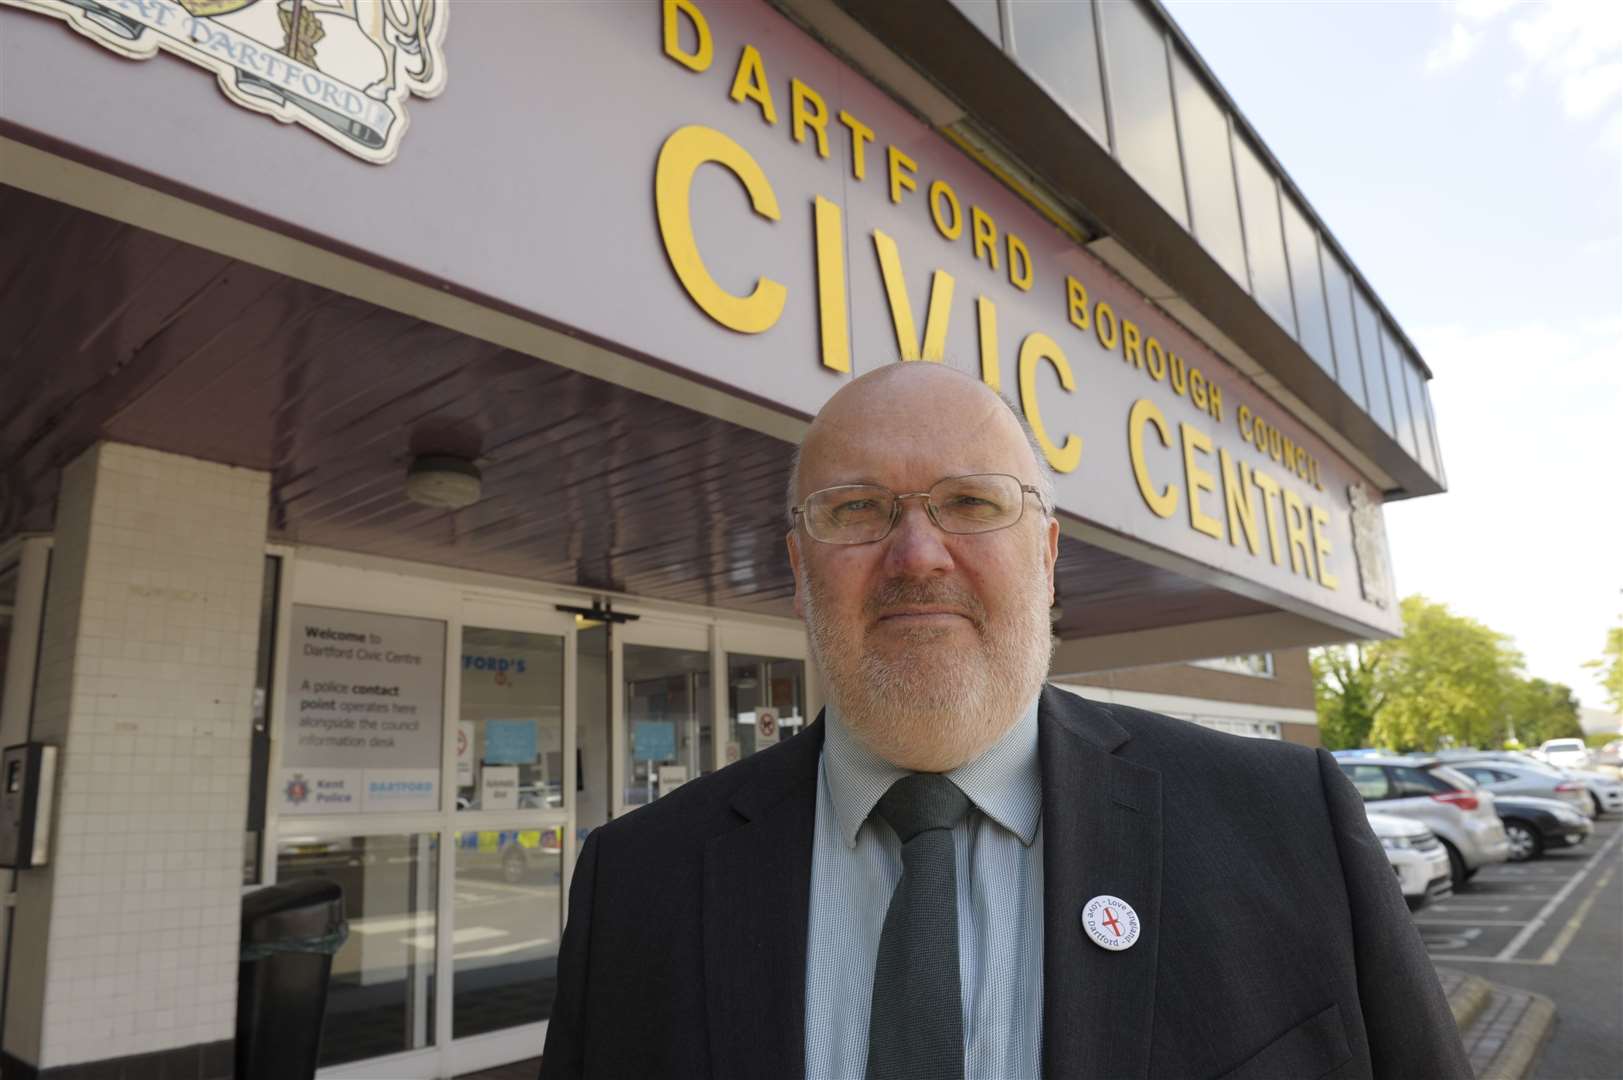 Dartford Council leader Jeremy Kite has announced an equality review Picture: Steve Crispe